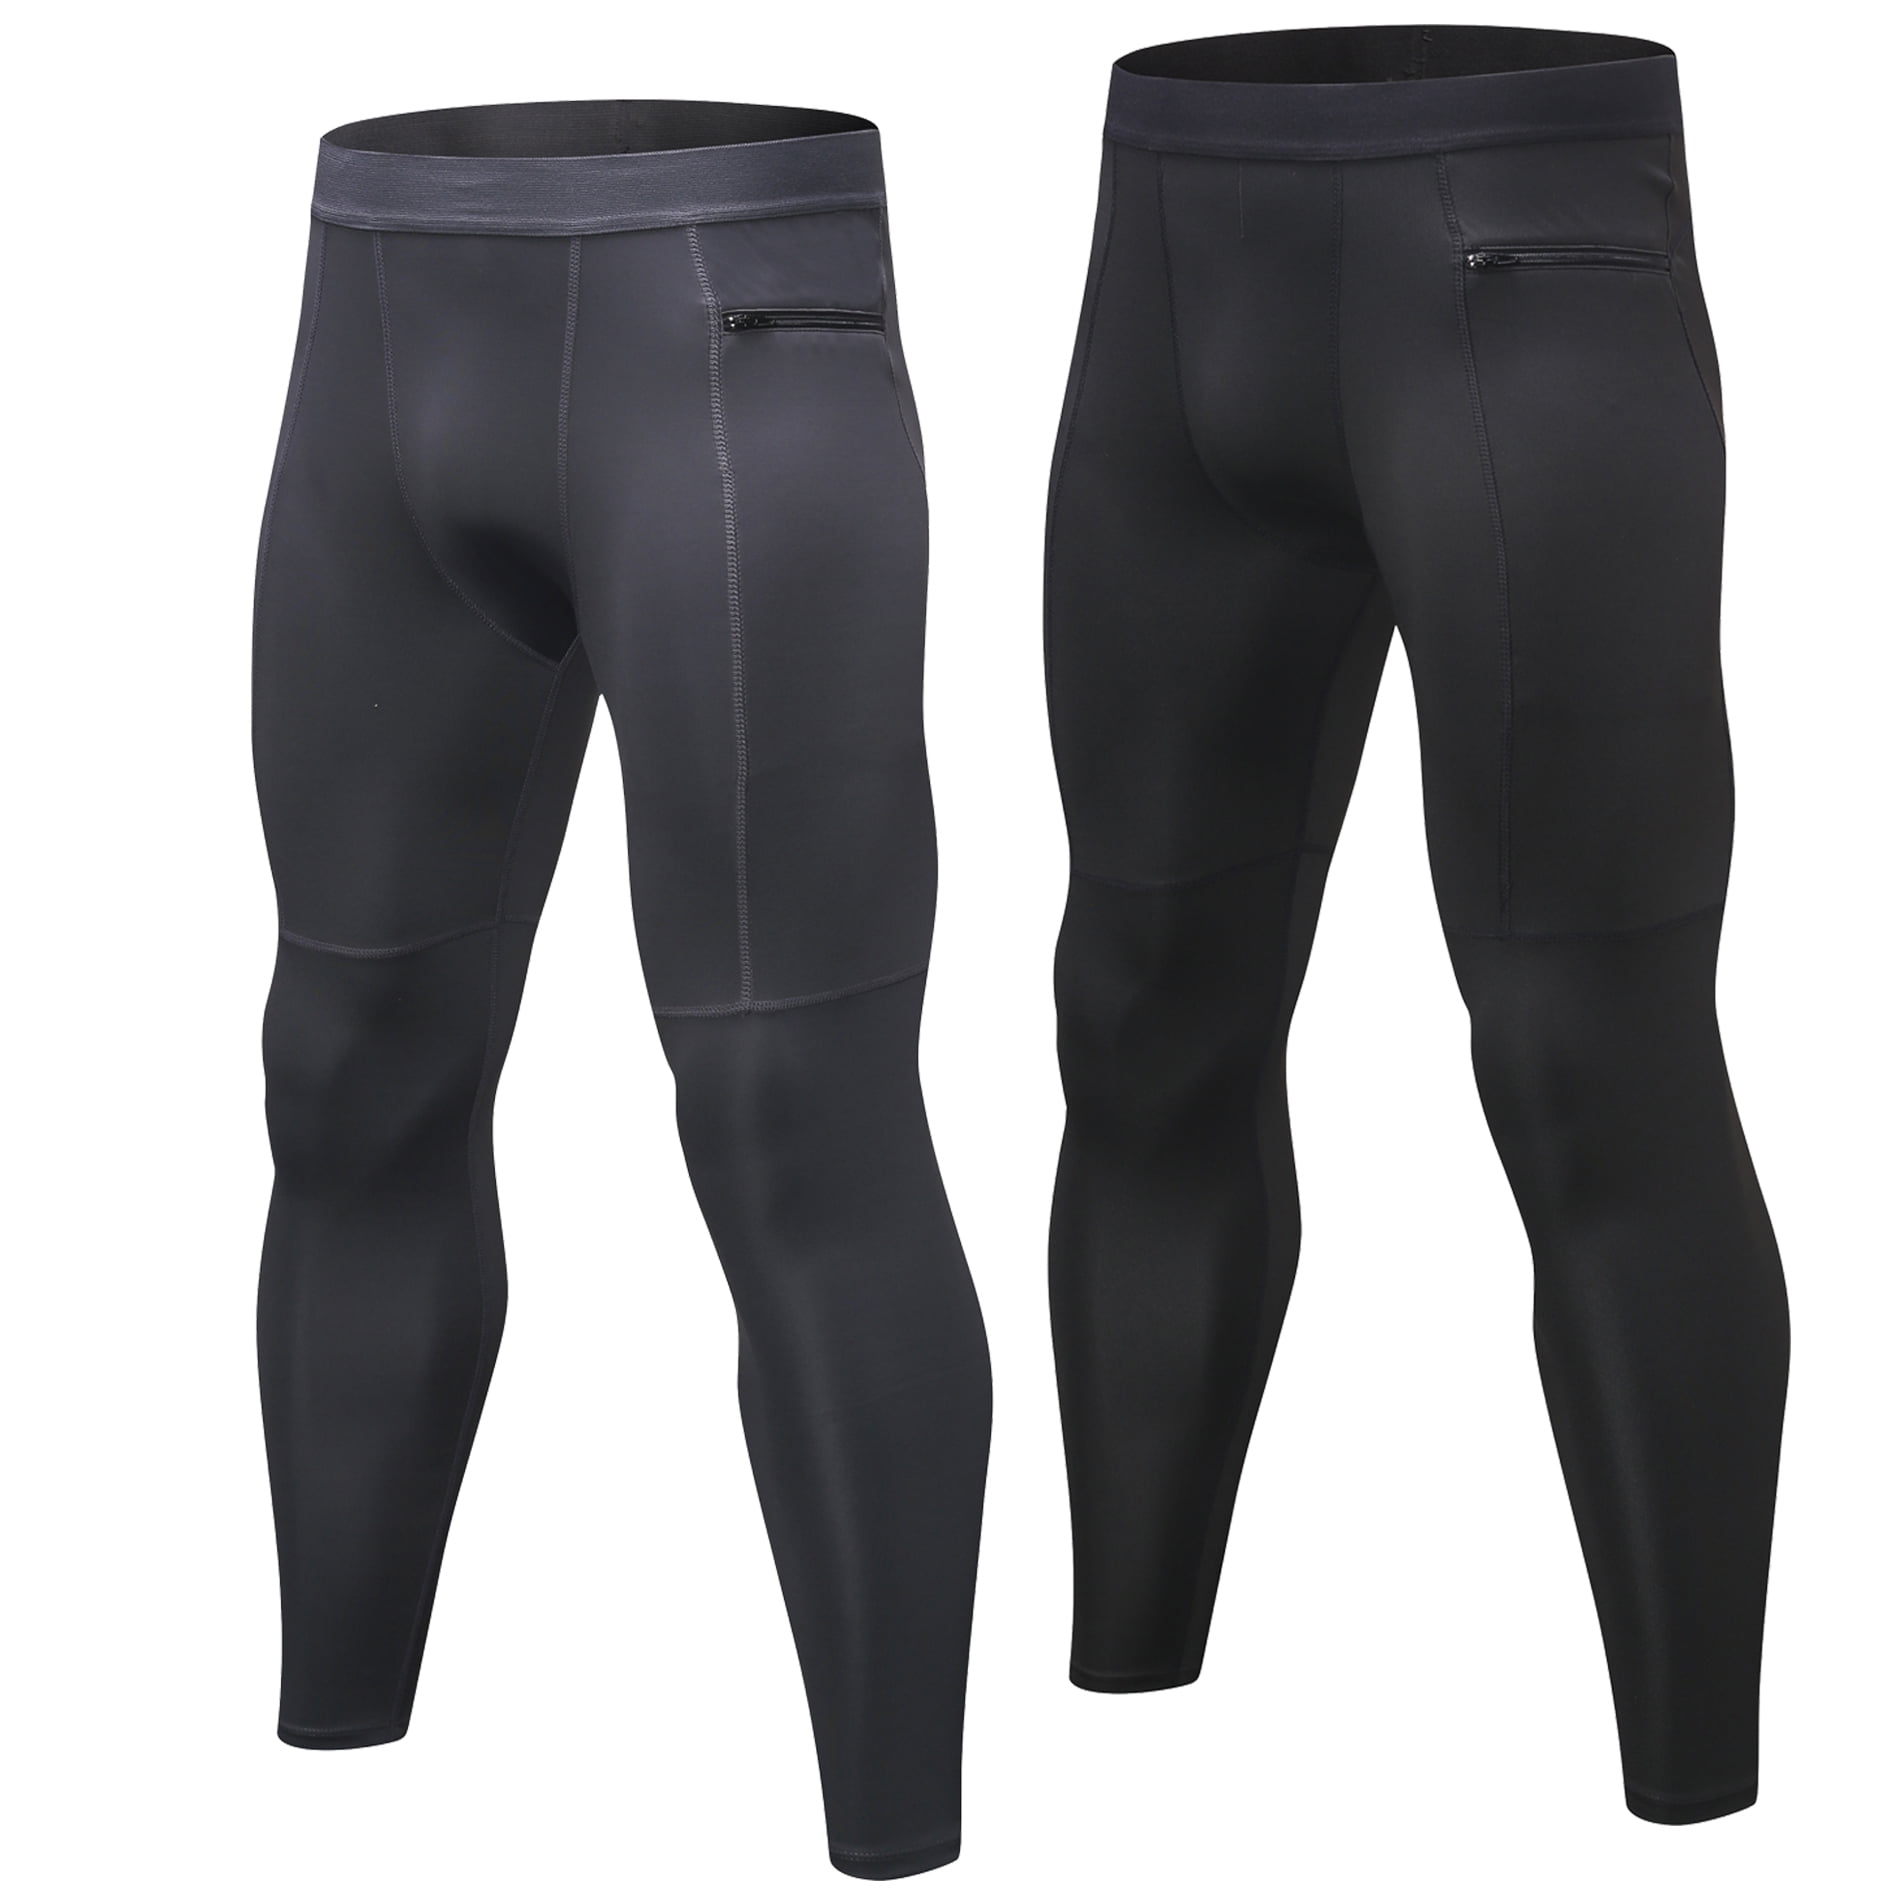 Men Compression Pants Gym long Tights Workout Athletic Under Base Layers Spandex 